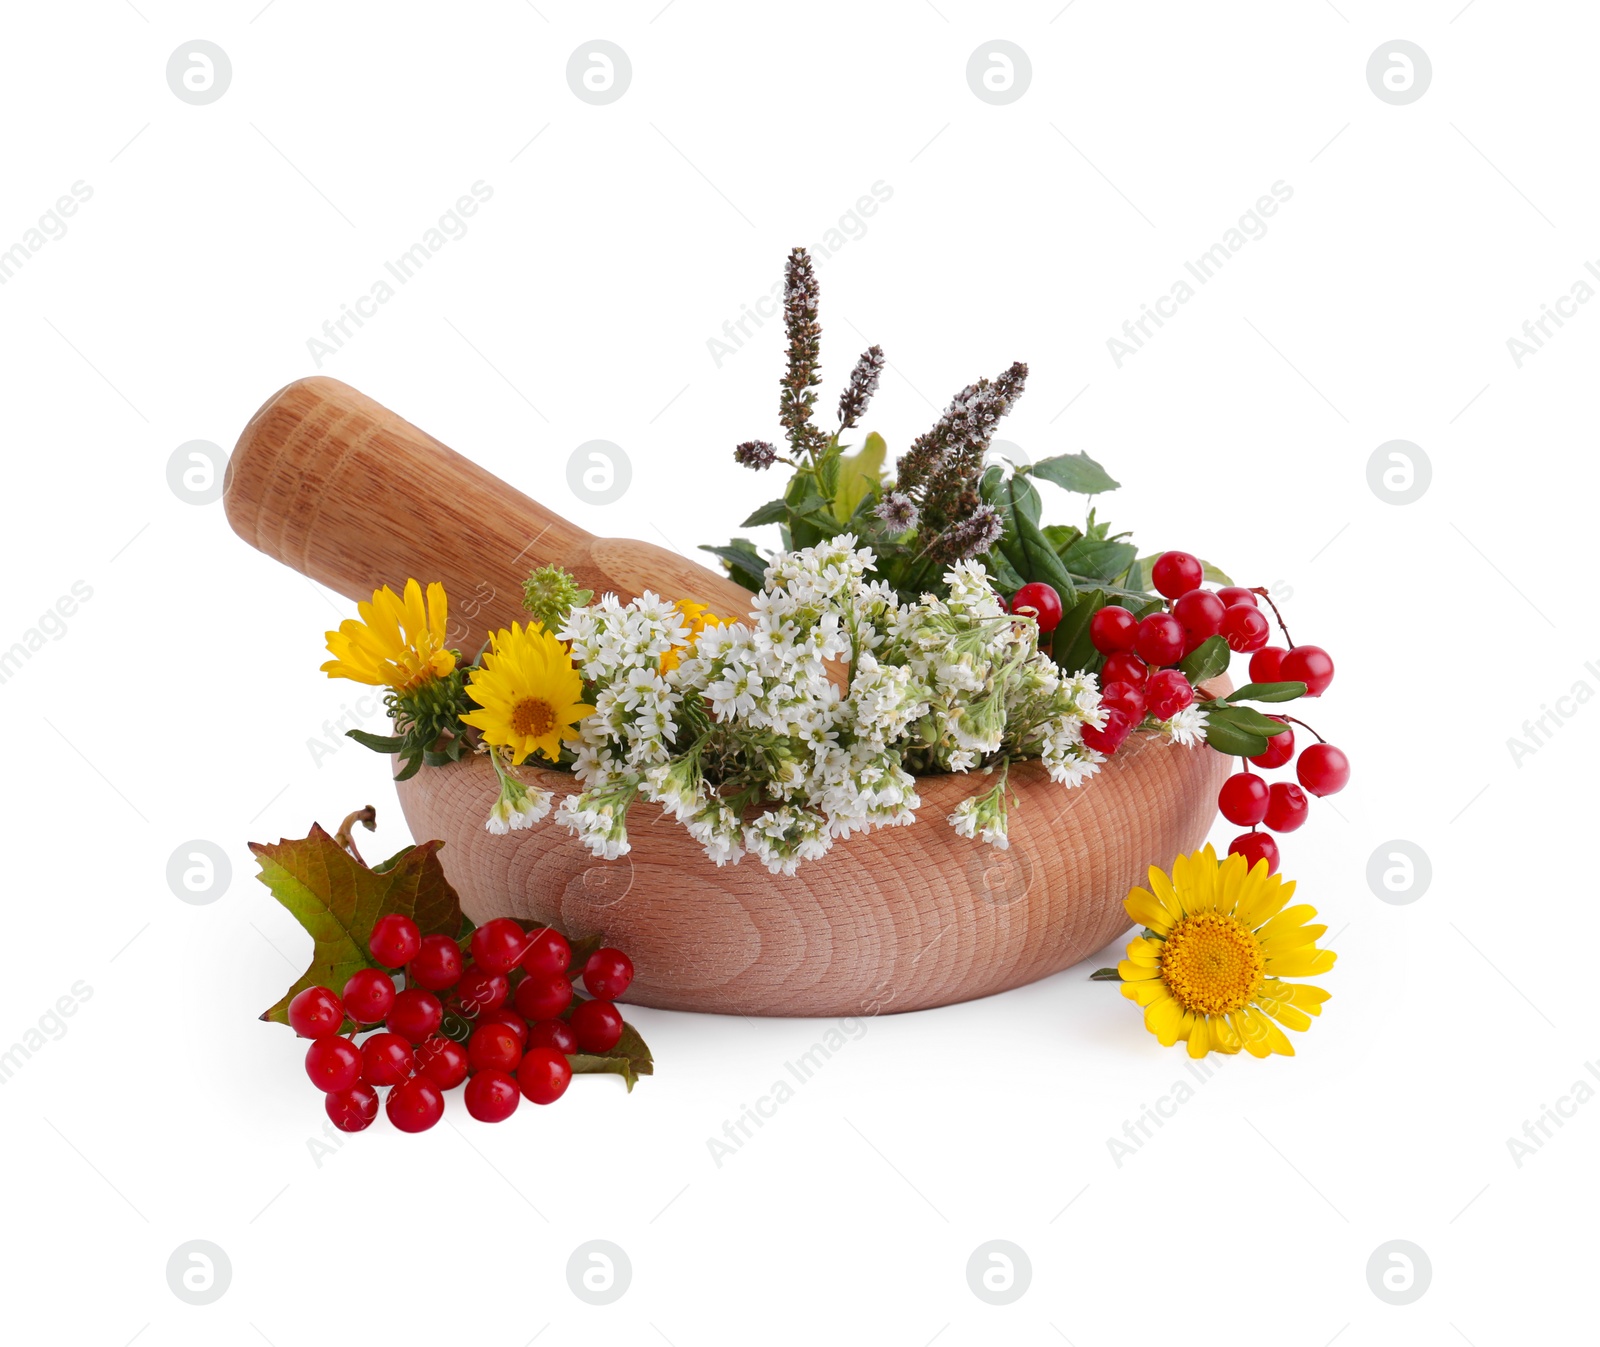 Photo of Wooden mortar, pestle, different flowers and berries on white background